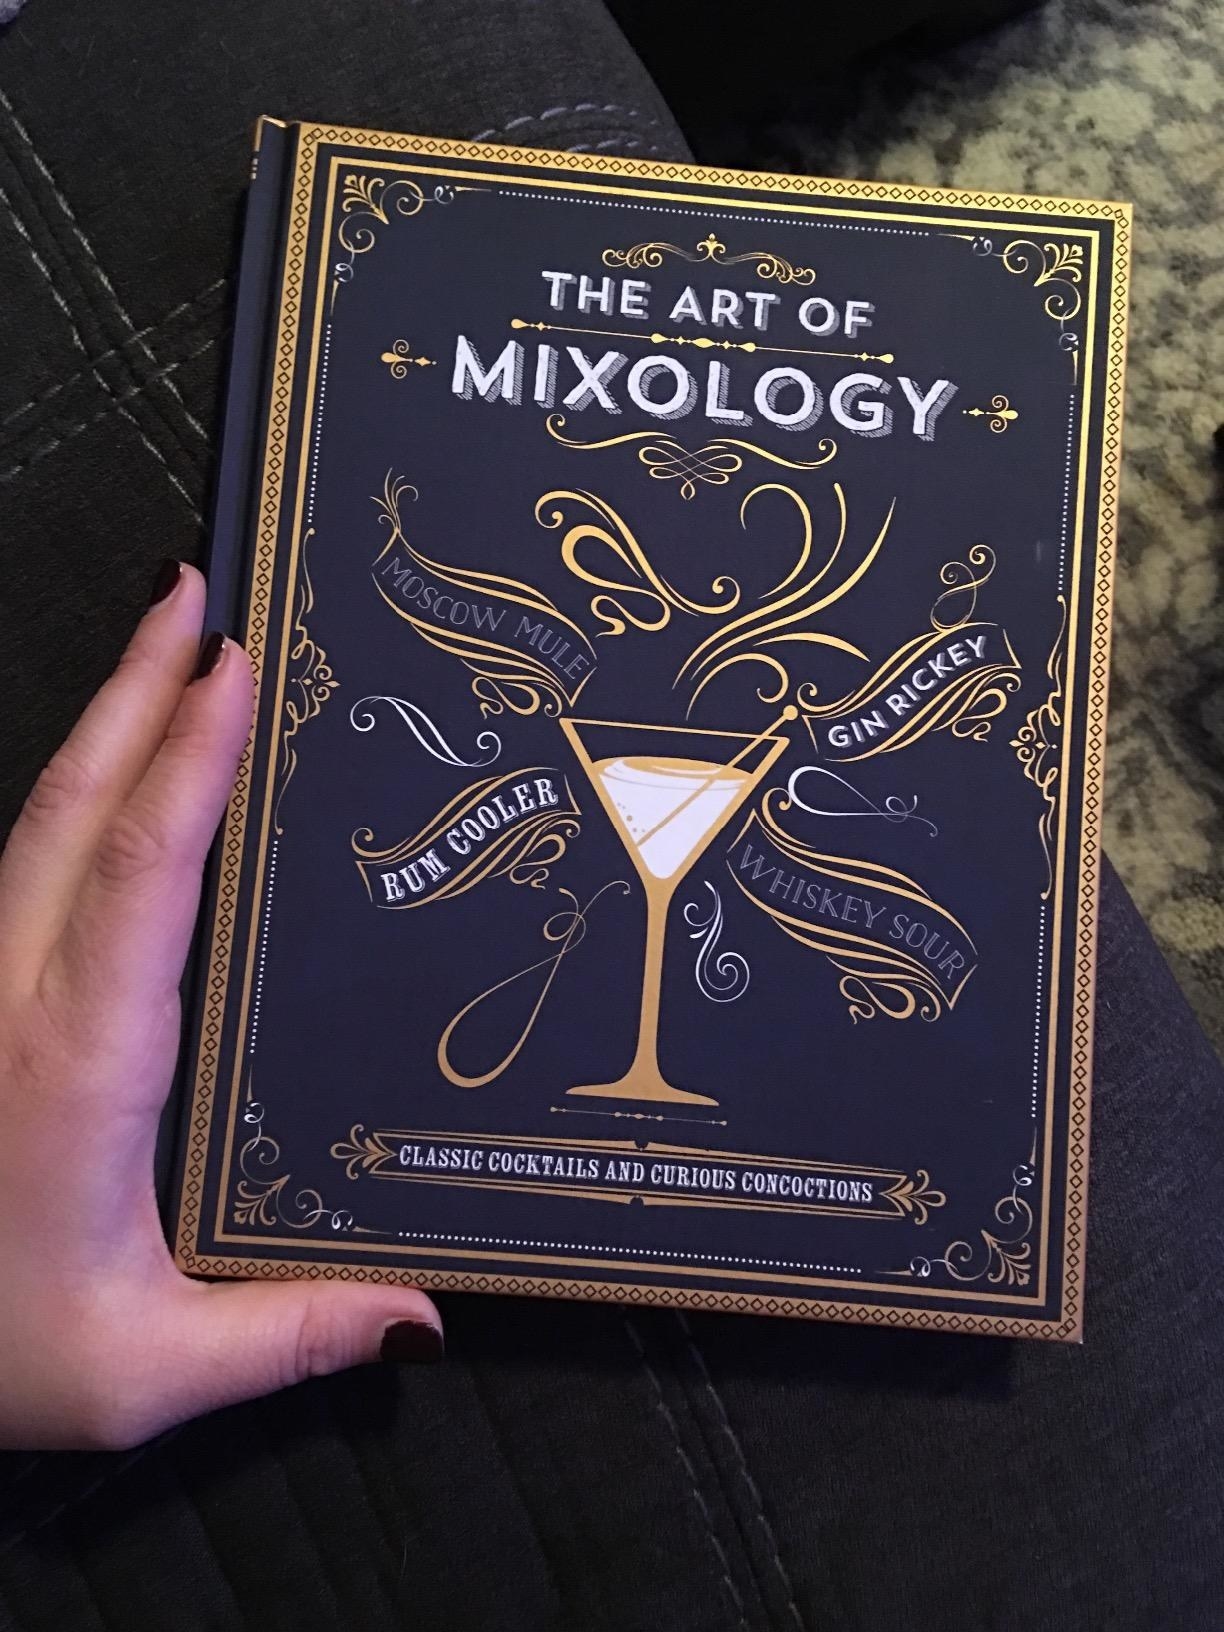 the cover of the cocktail book